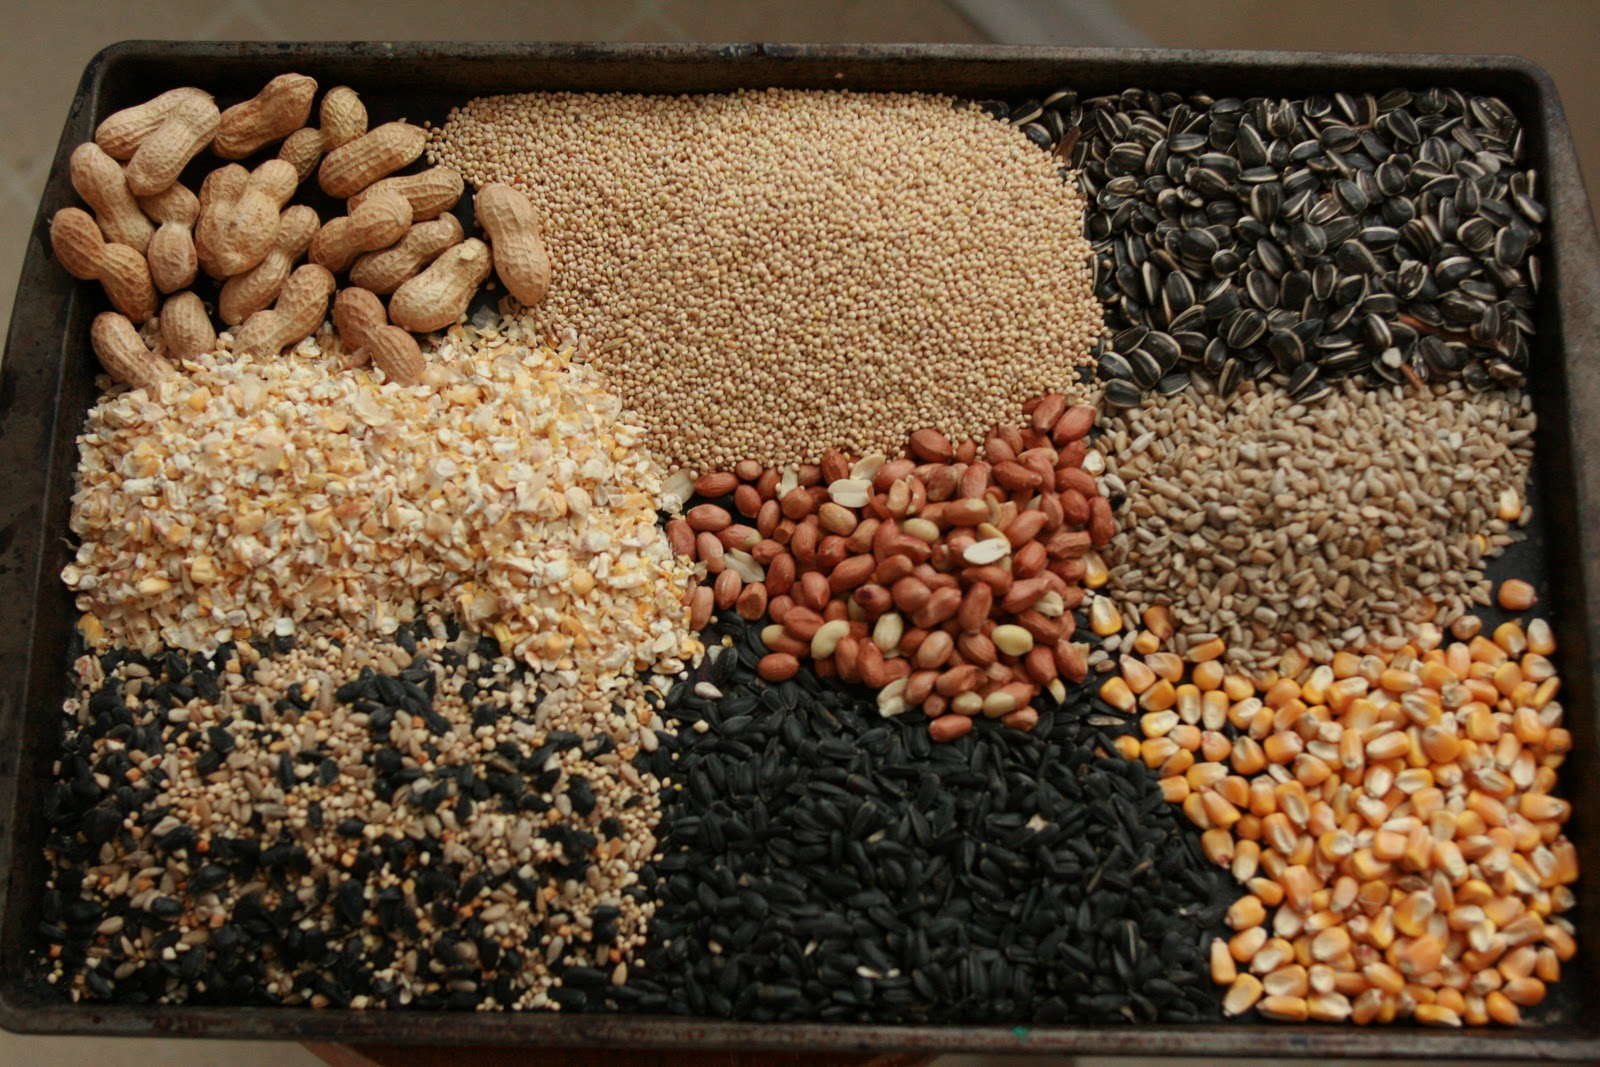 A tray with various types of birdseed